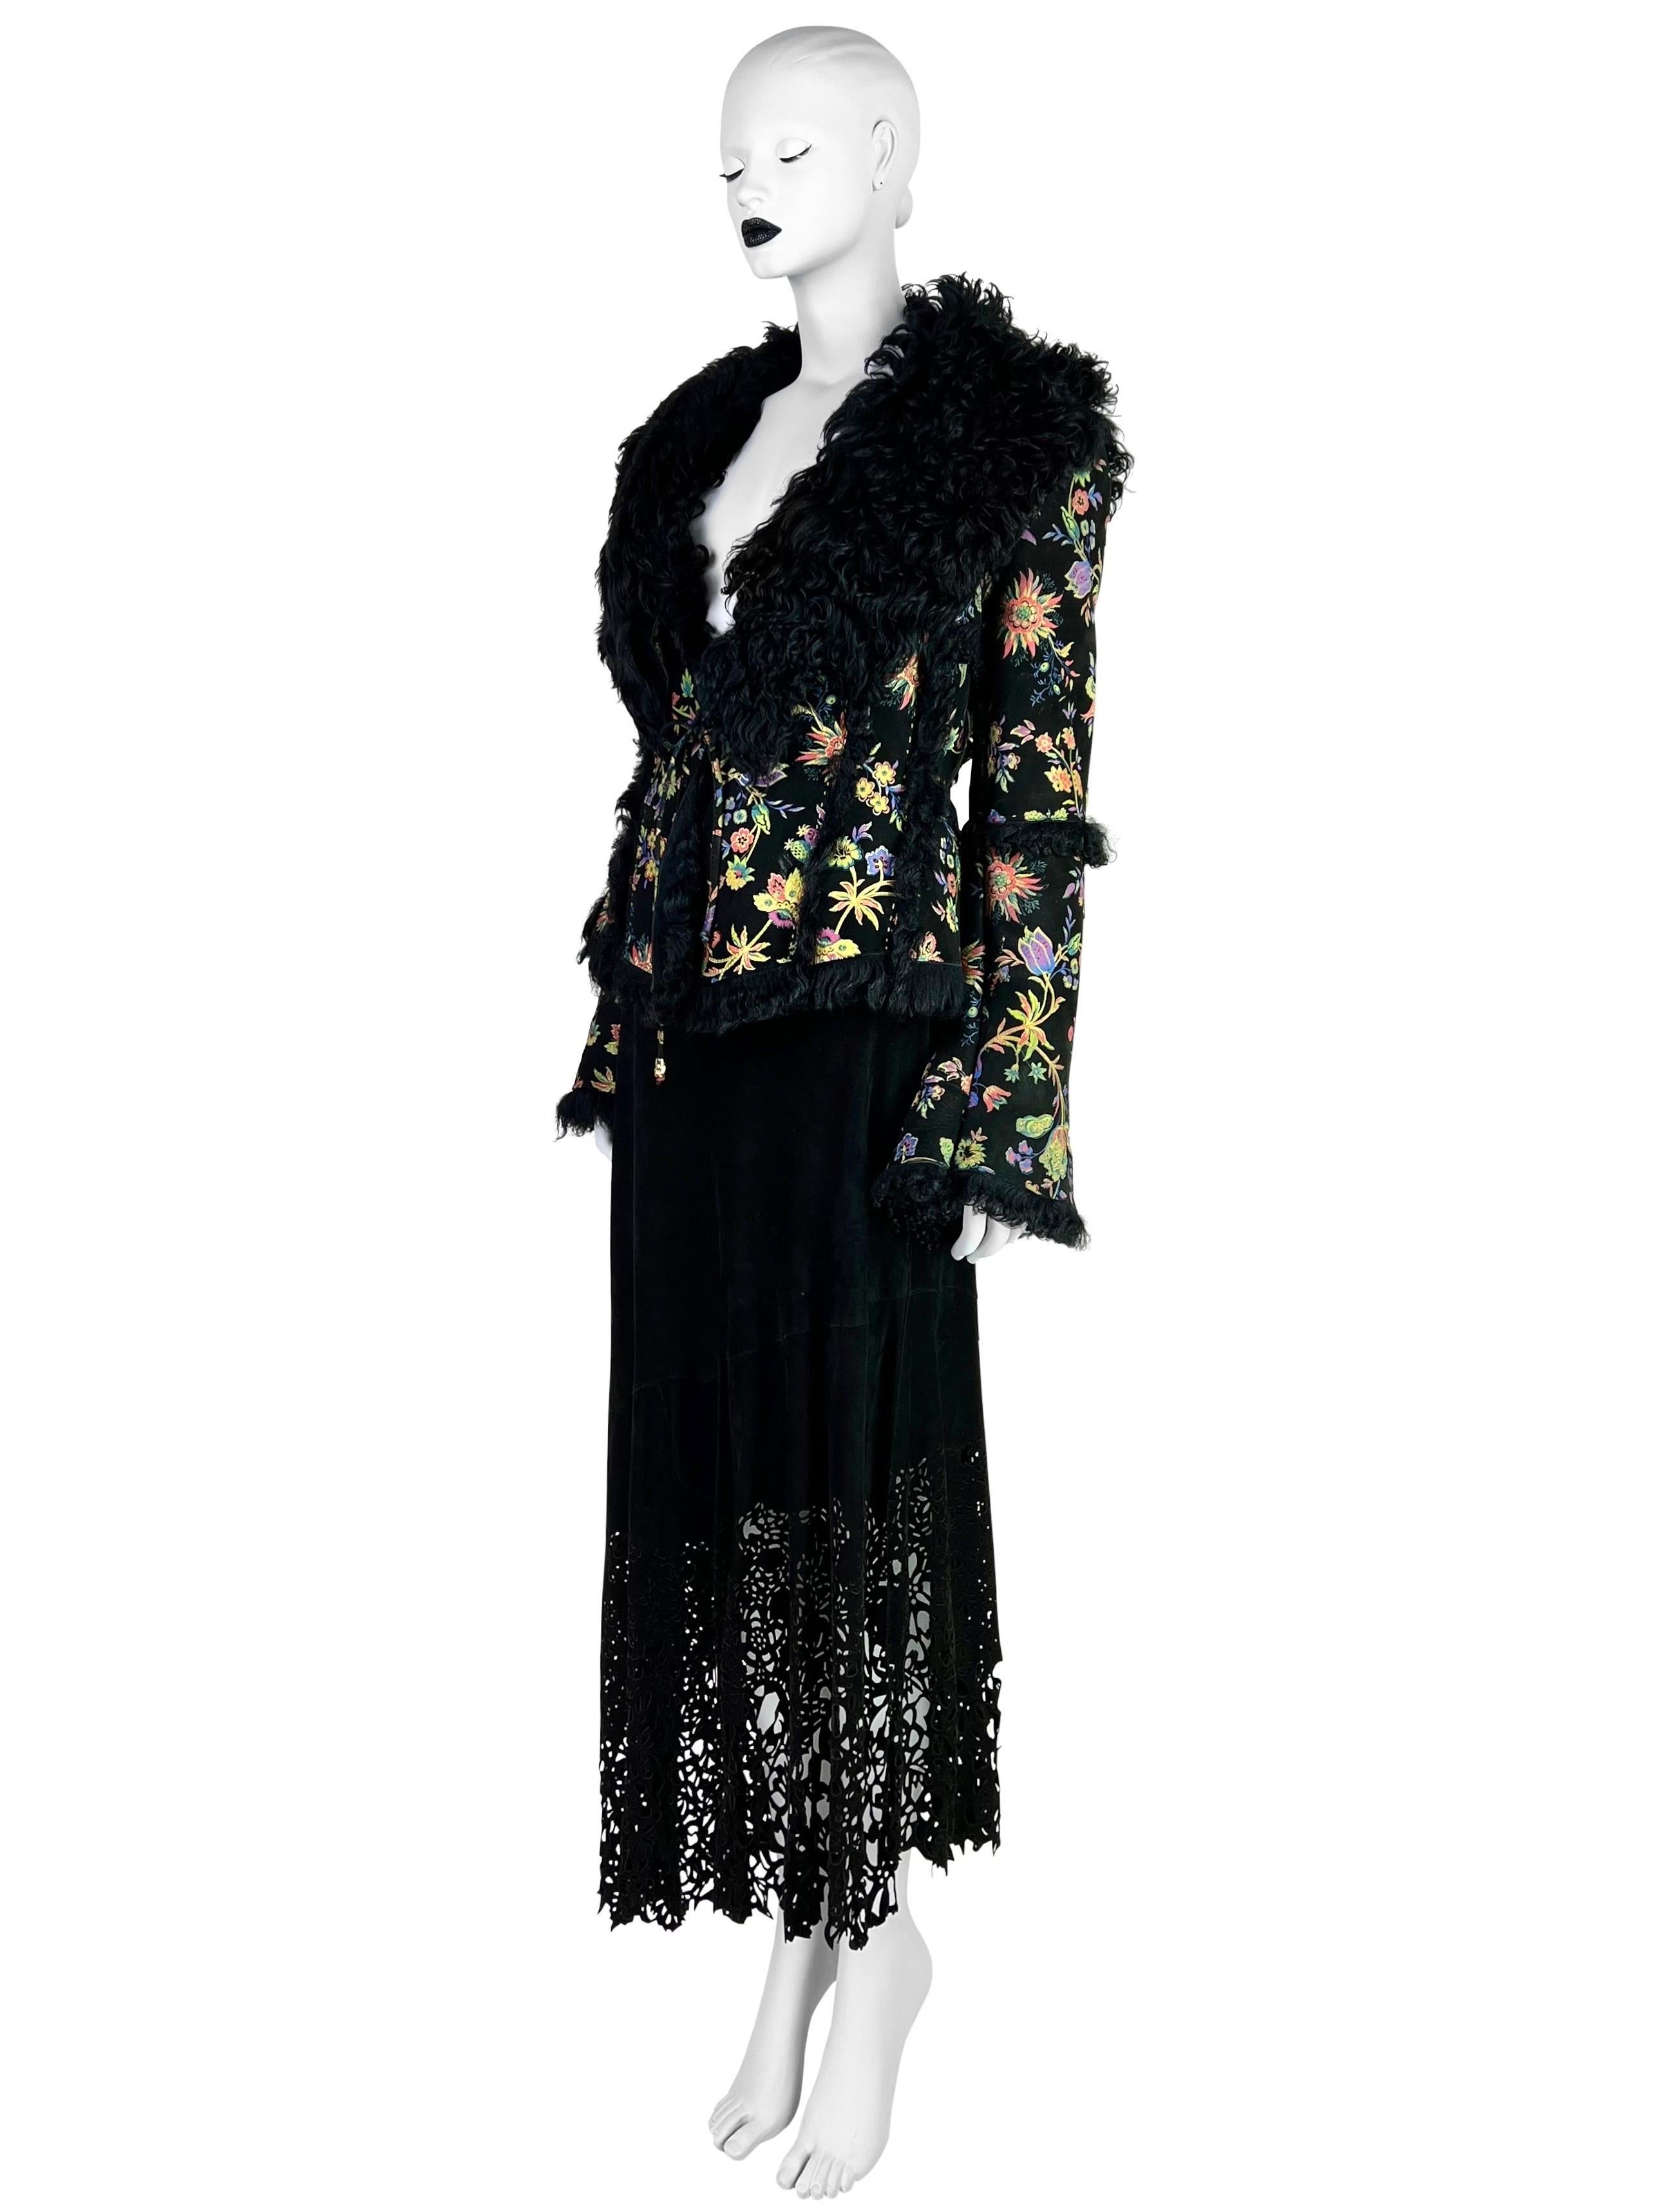 Roberto Cavalli Fall 1999 Hand-painted Flower Shearling Jacket For Sale 5